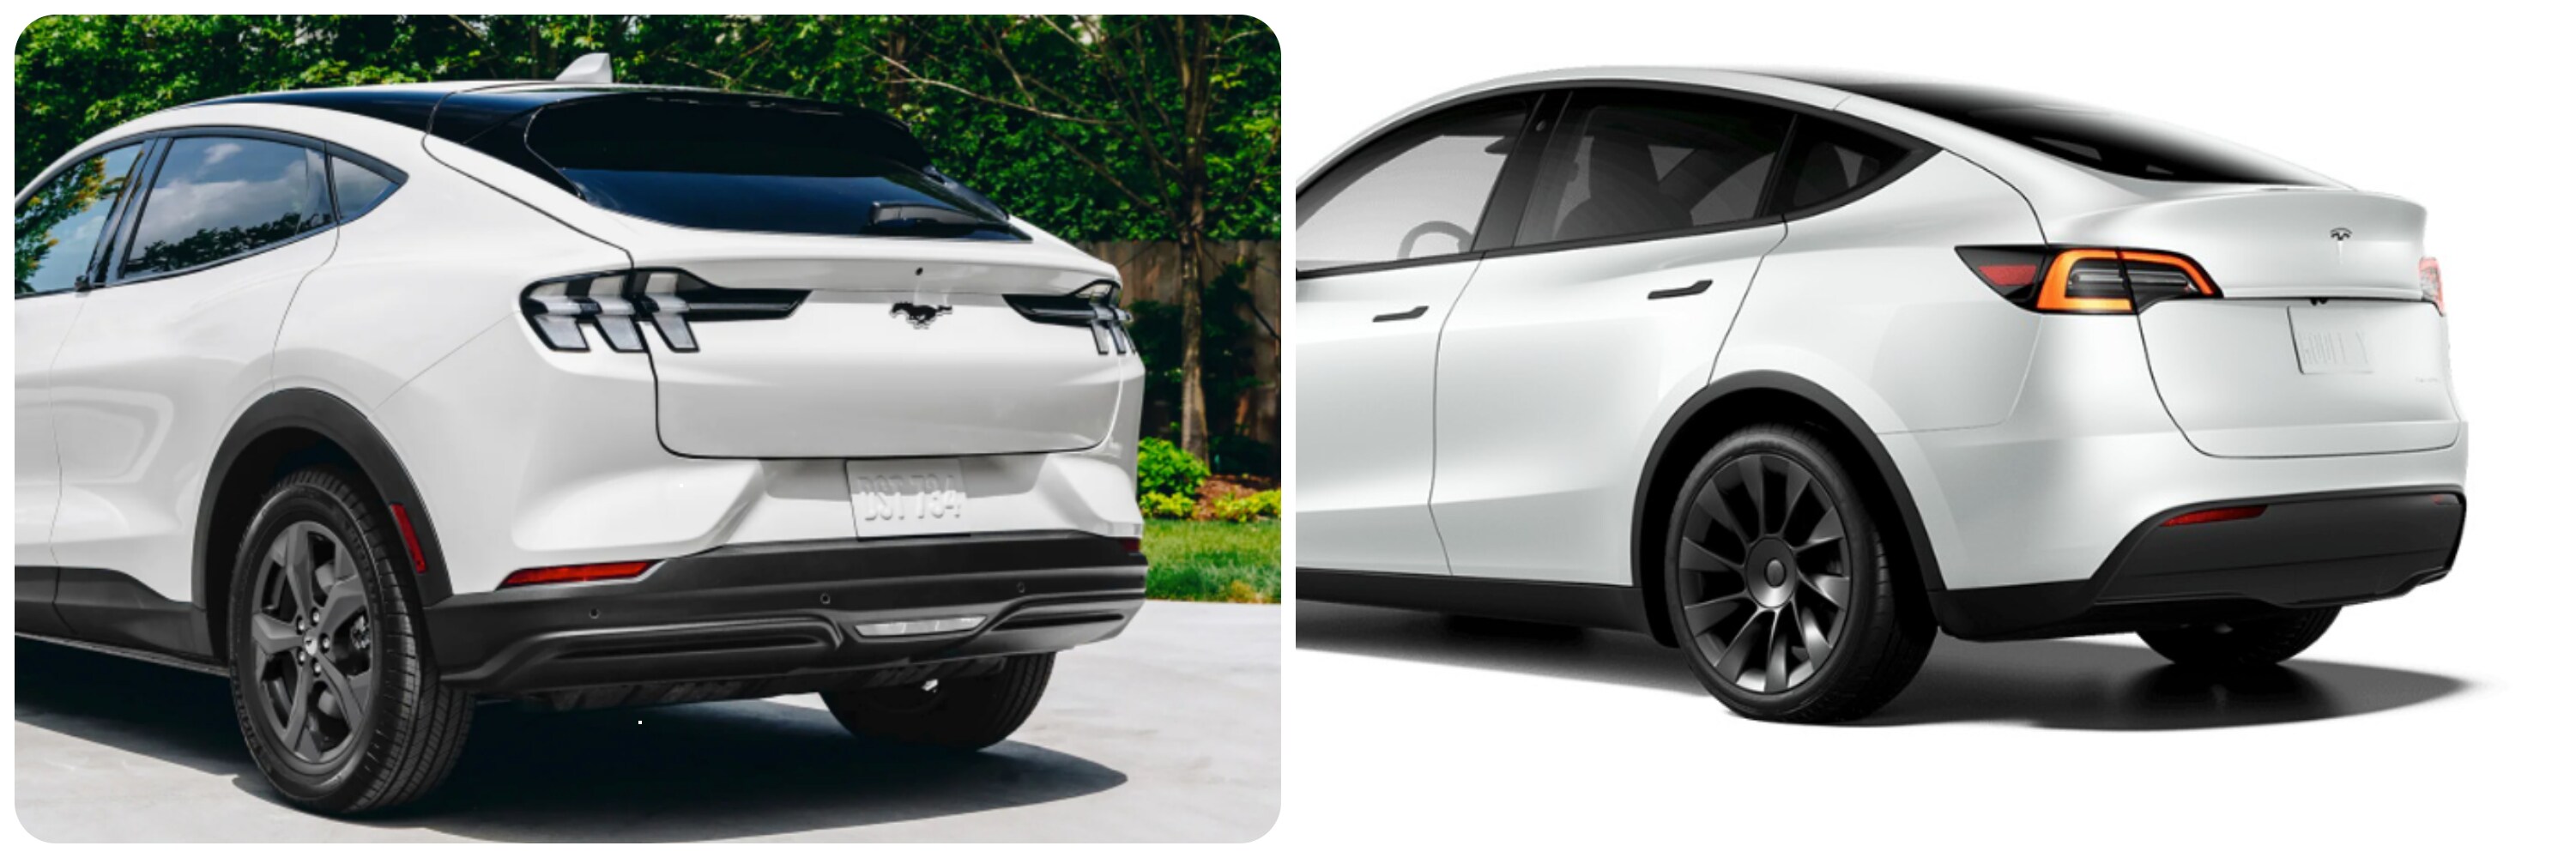 side-by-side-view-of-2022-ford-mustang-mach-e-and-tesla-model-y